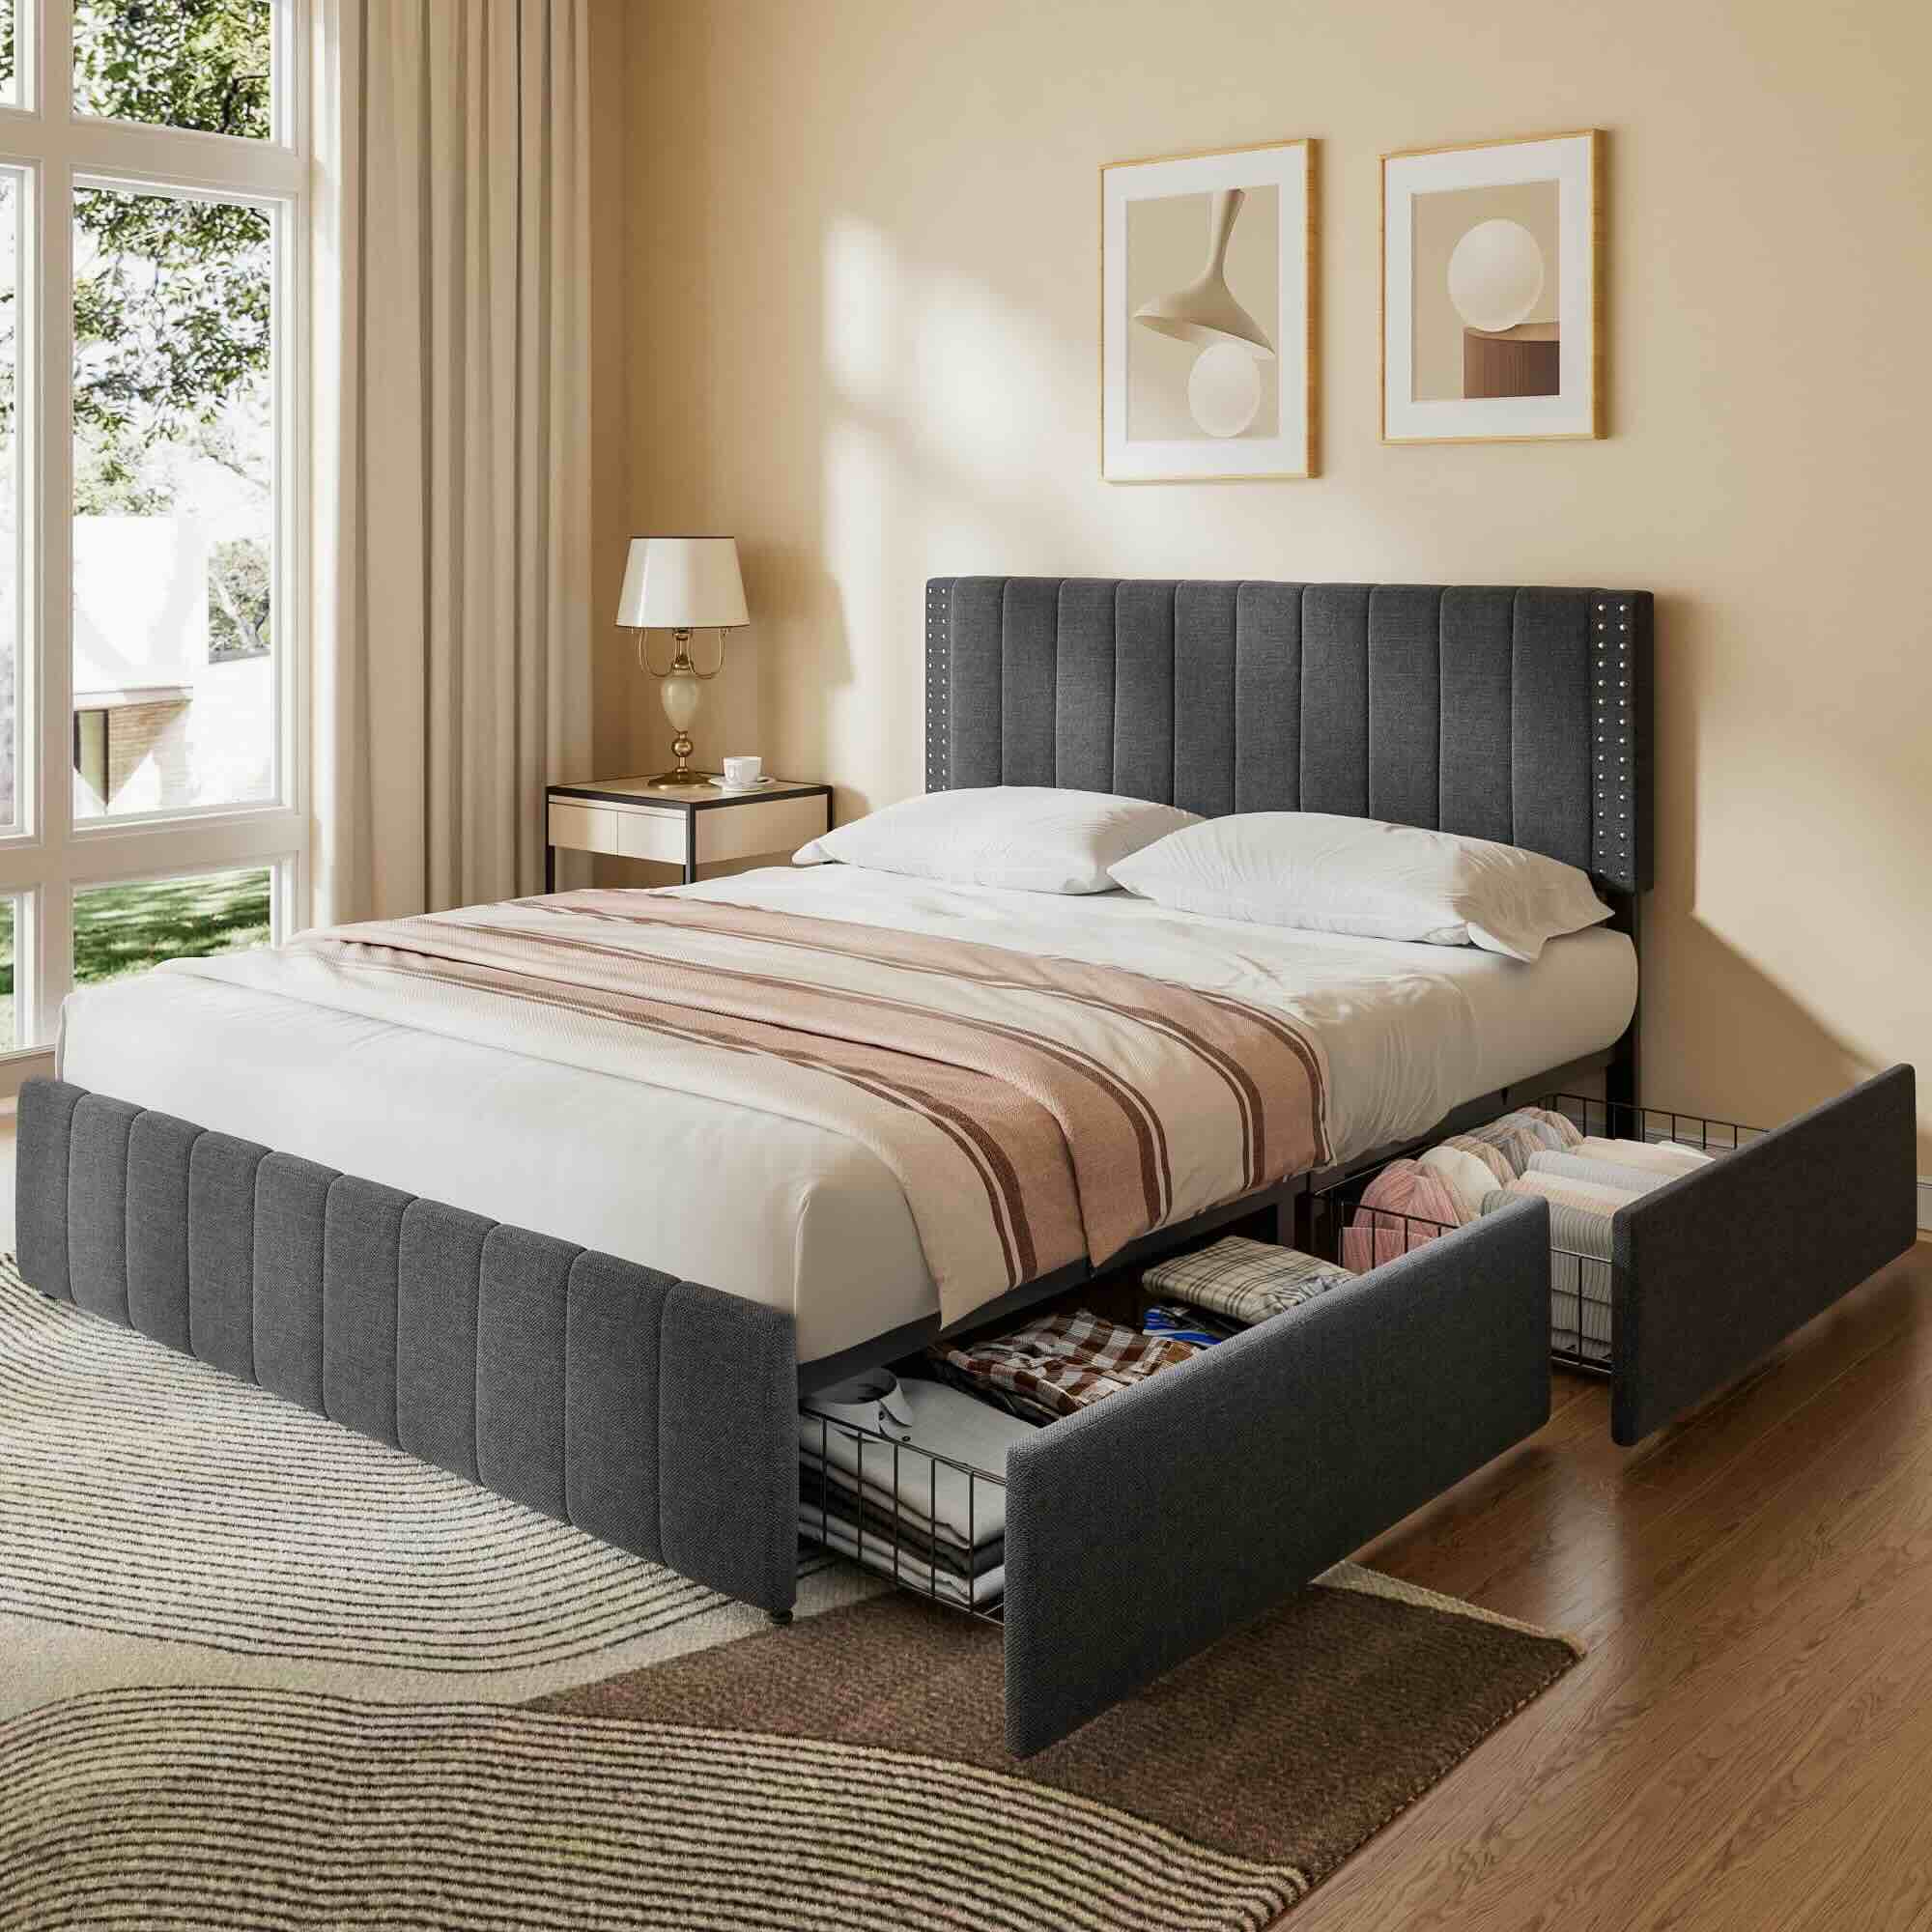 What Are The Dimensions Of A Queen Size Bed Frame